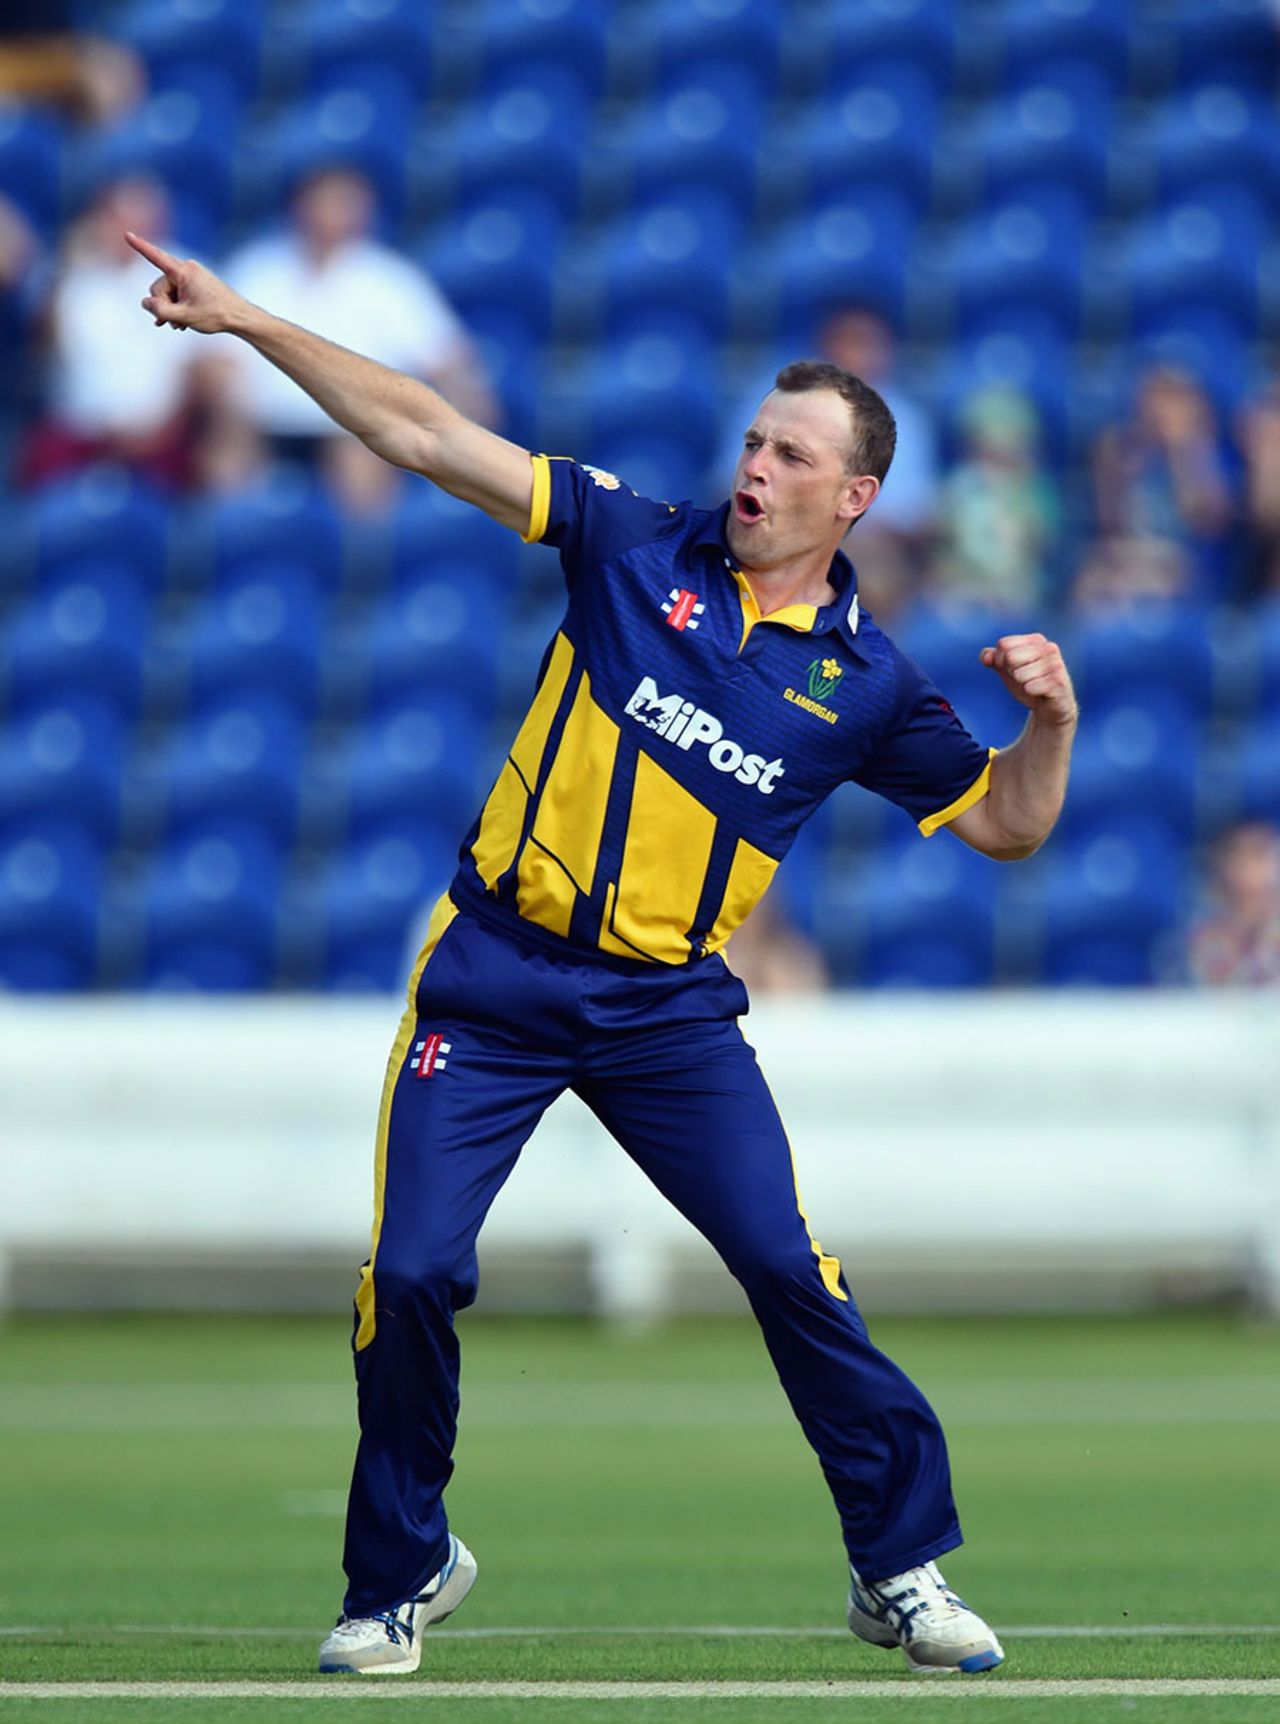 Graham Wagg struck in his first over, Glamorgan v Gloucestershire, NatWest T20, Cardiff, July 25, 2014